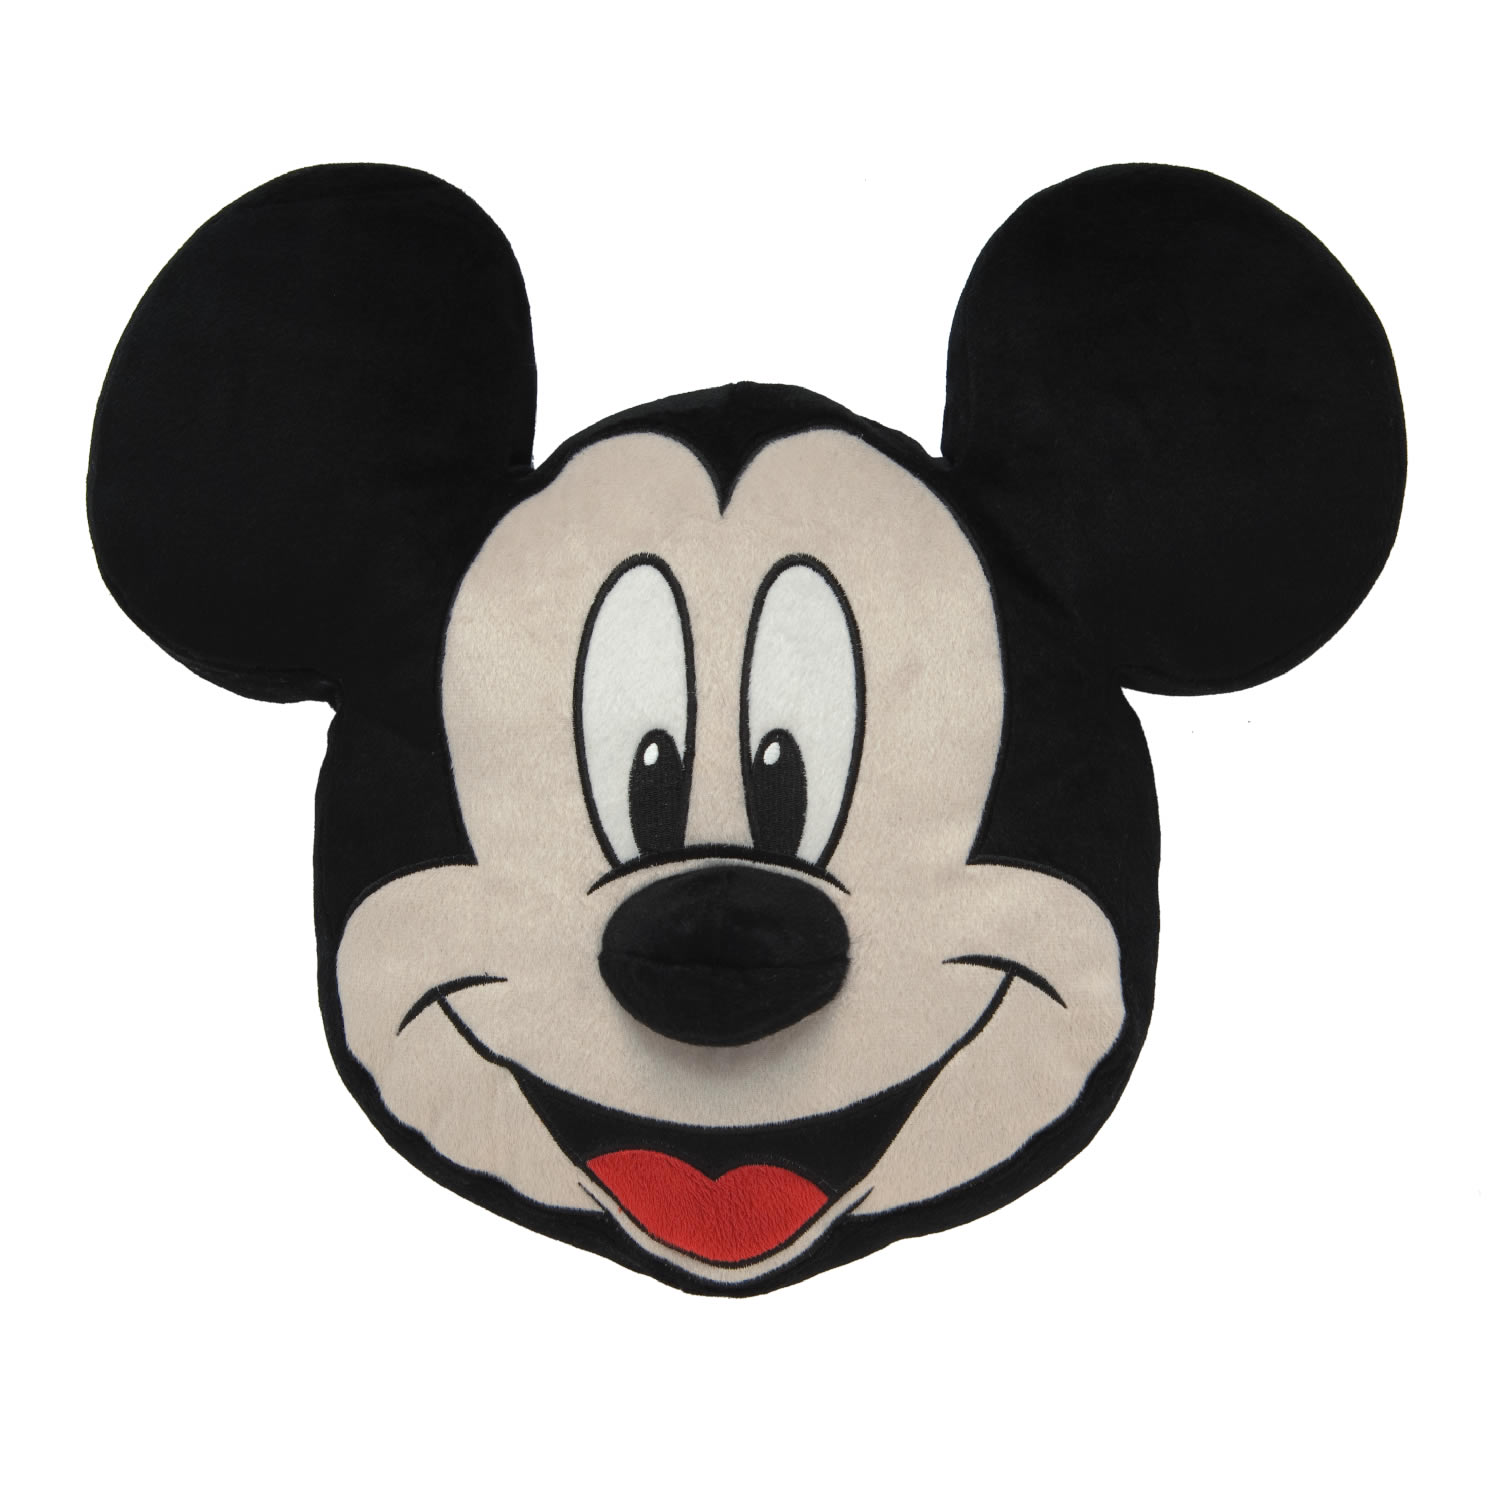 Mickey Mouse Head 91 Hd Wallpapers in Cartoons - Imagesci.com